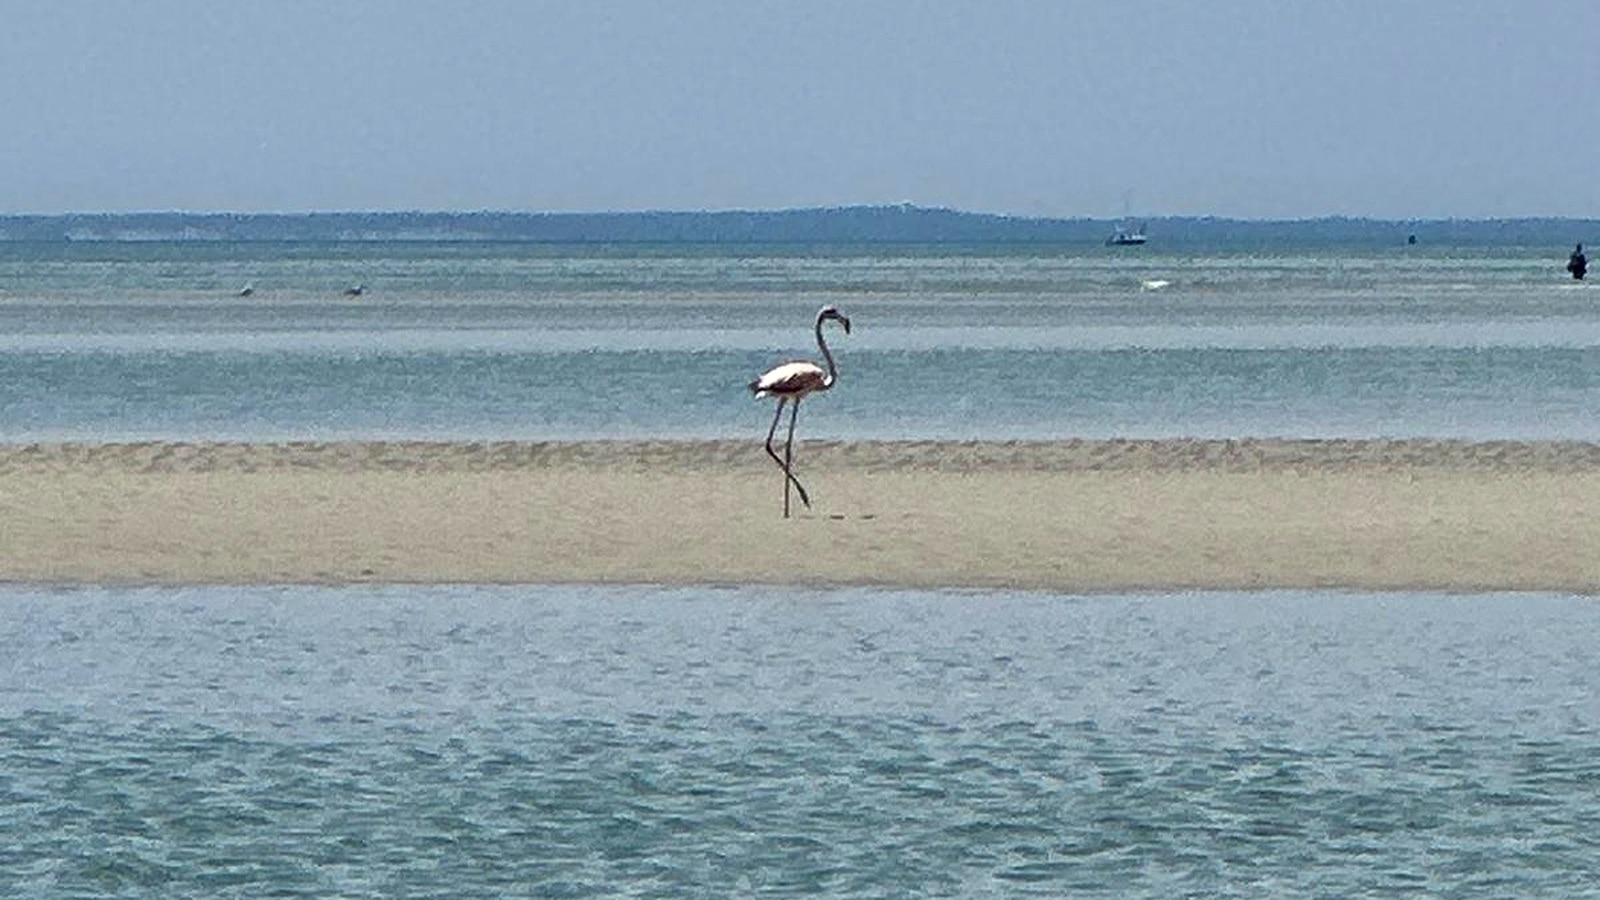 Flamingo spotted in Massachusetts in potentially unprecedented event